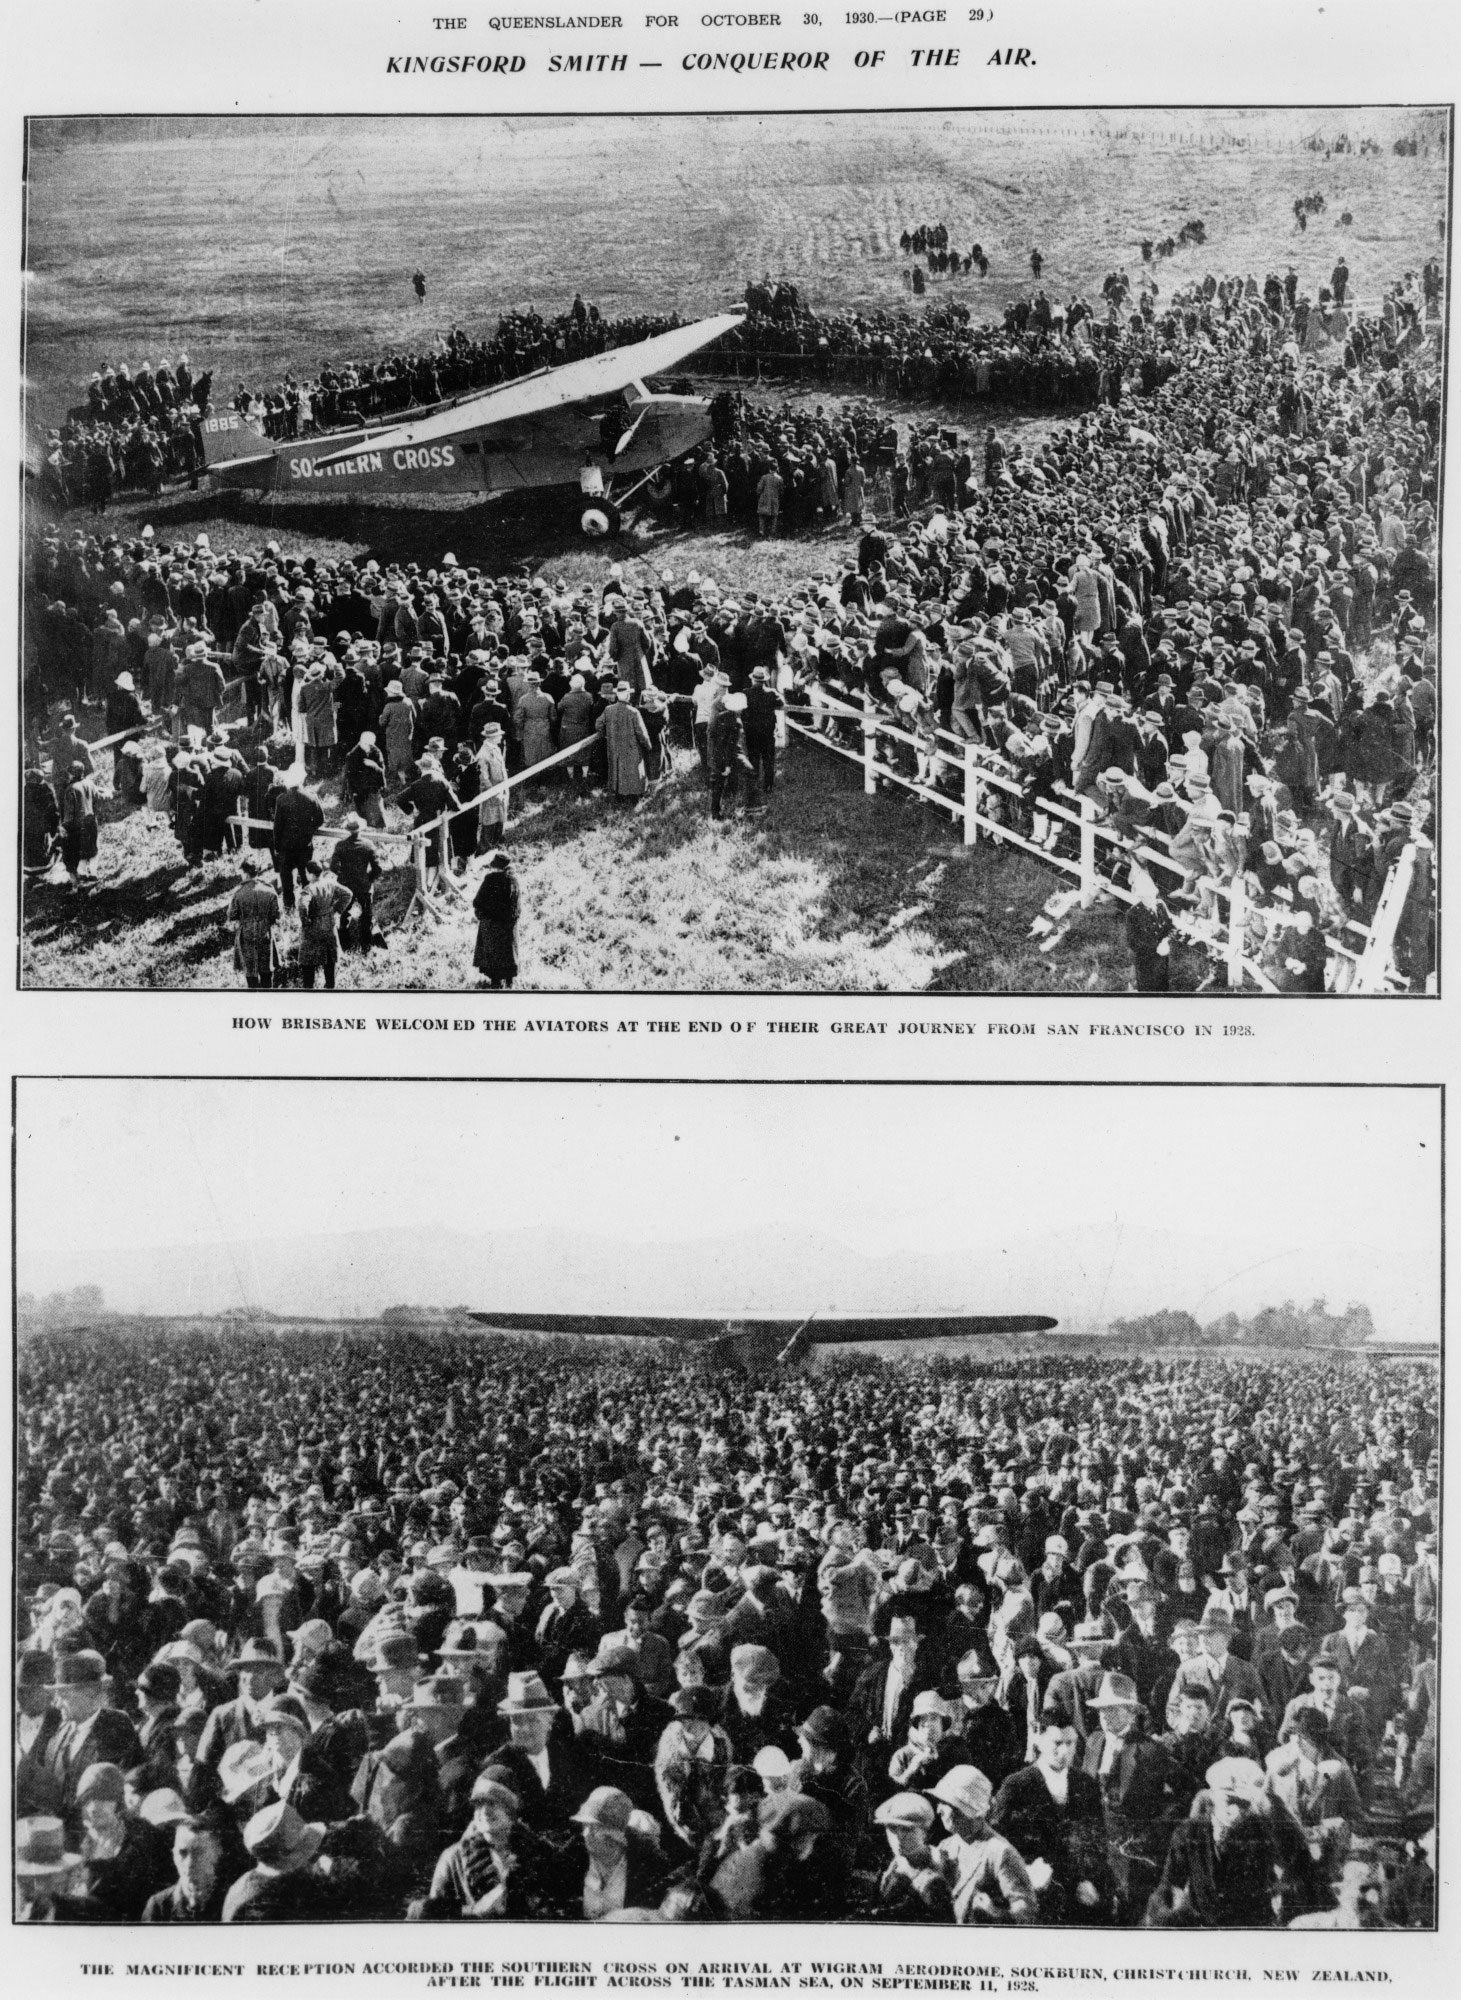 Crowds greeting the Southern Cross in Brisbane and Christchurch, New Zealand, 1928.